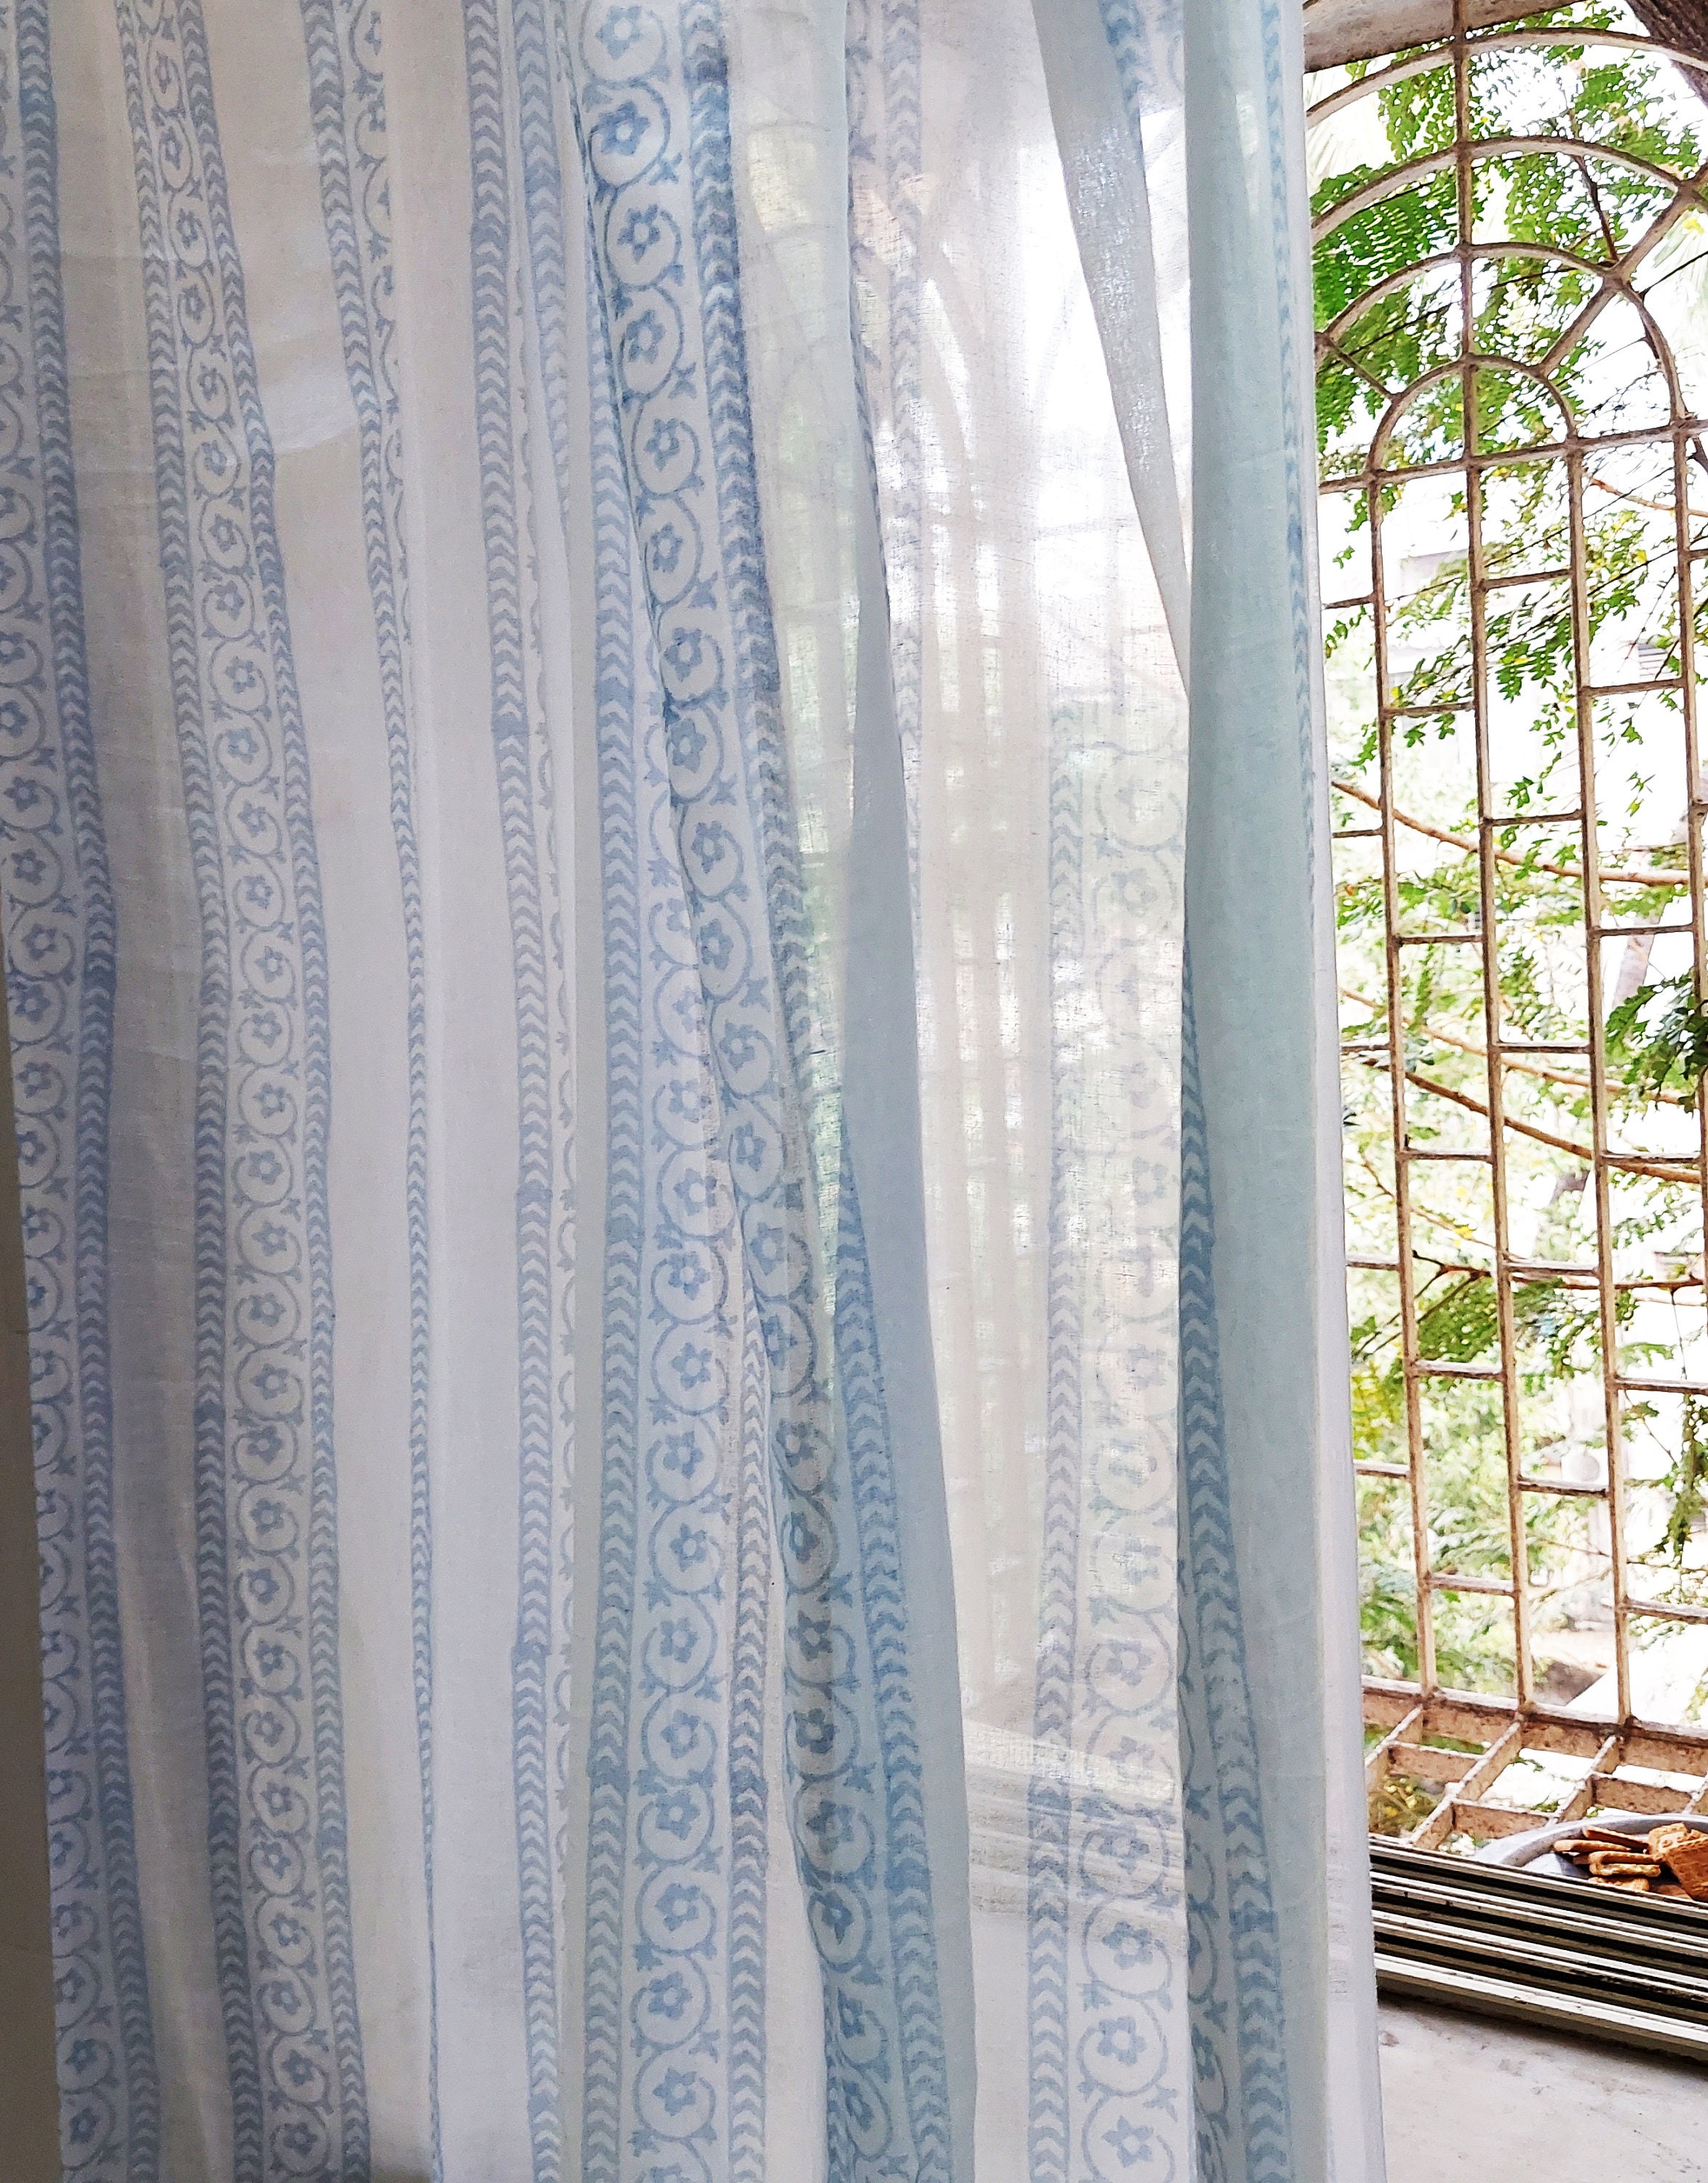 Indian Block Print Striped Curtains / Sheer Cotton Curtain / - Etsy